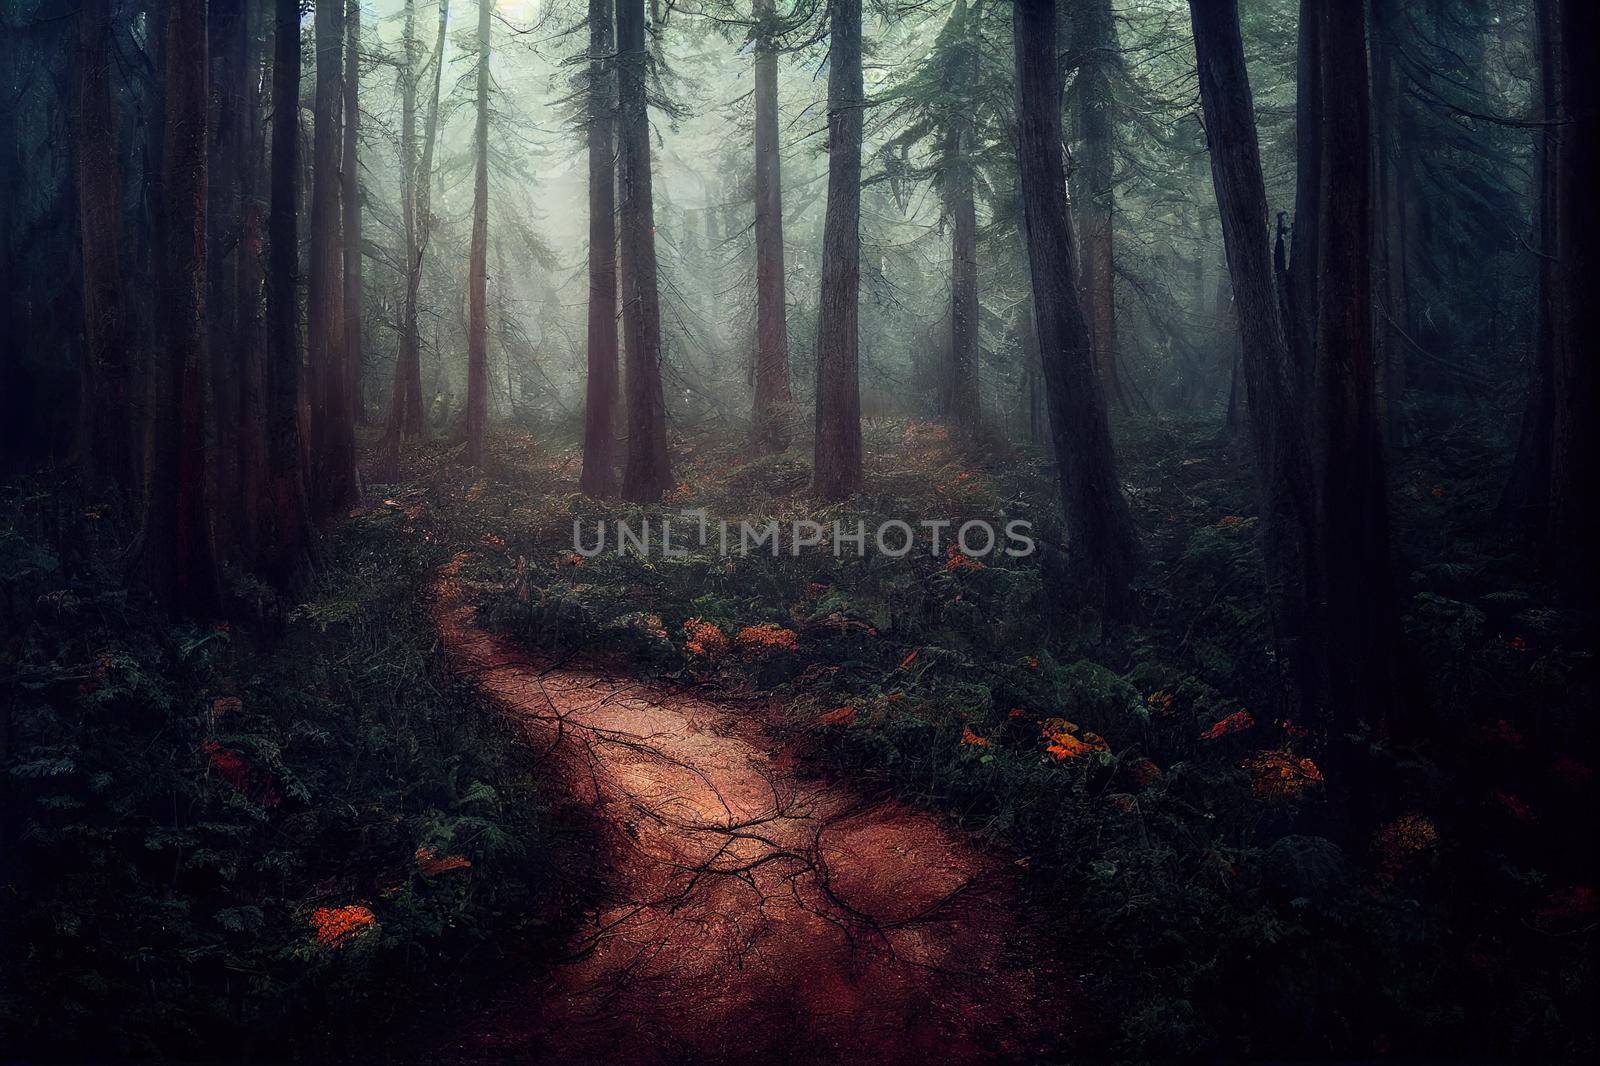 Forest in British Columbia with moody lights and colors. A path leads through the warm summer park. High quality illustration